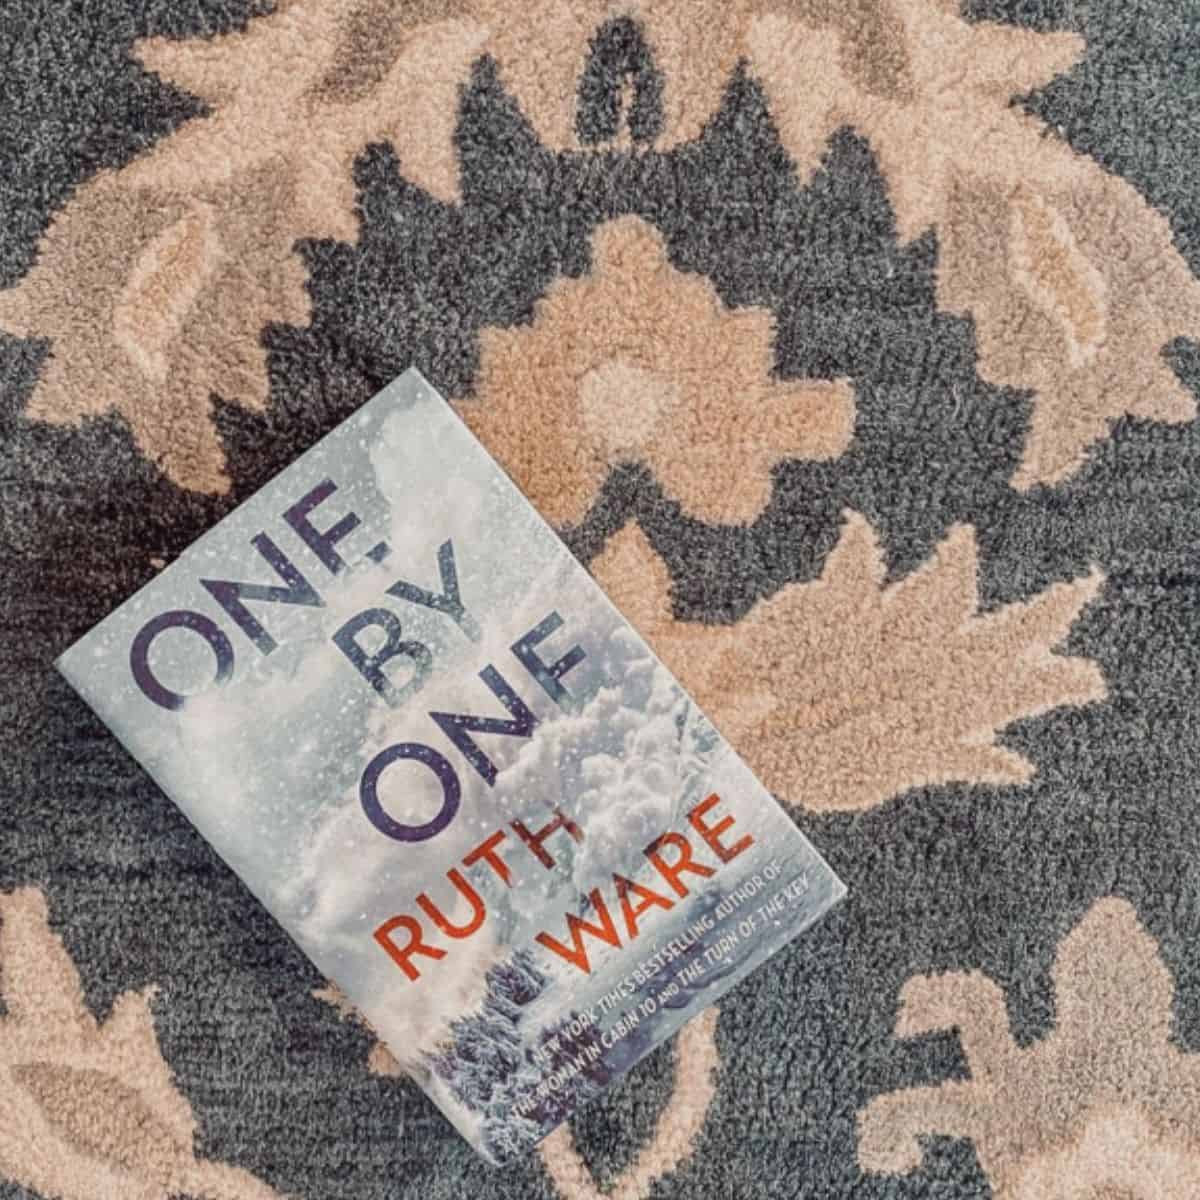 one by one ruth ware on the carpet.